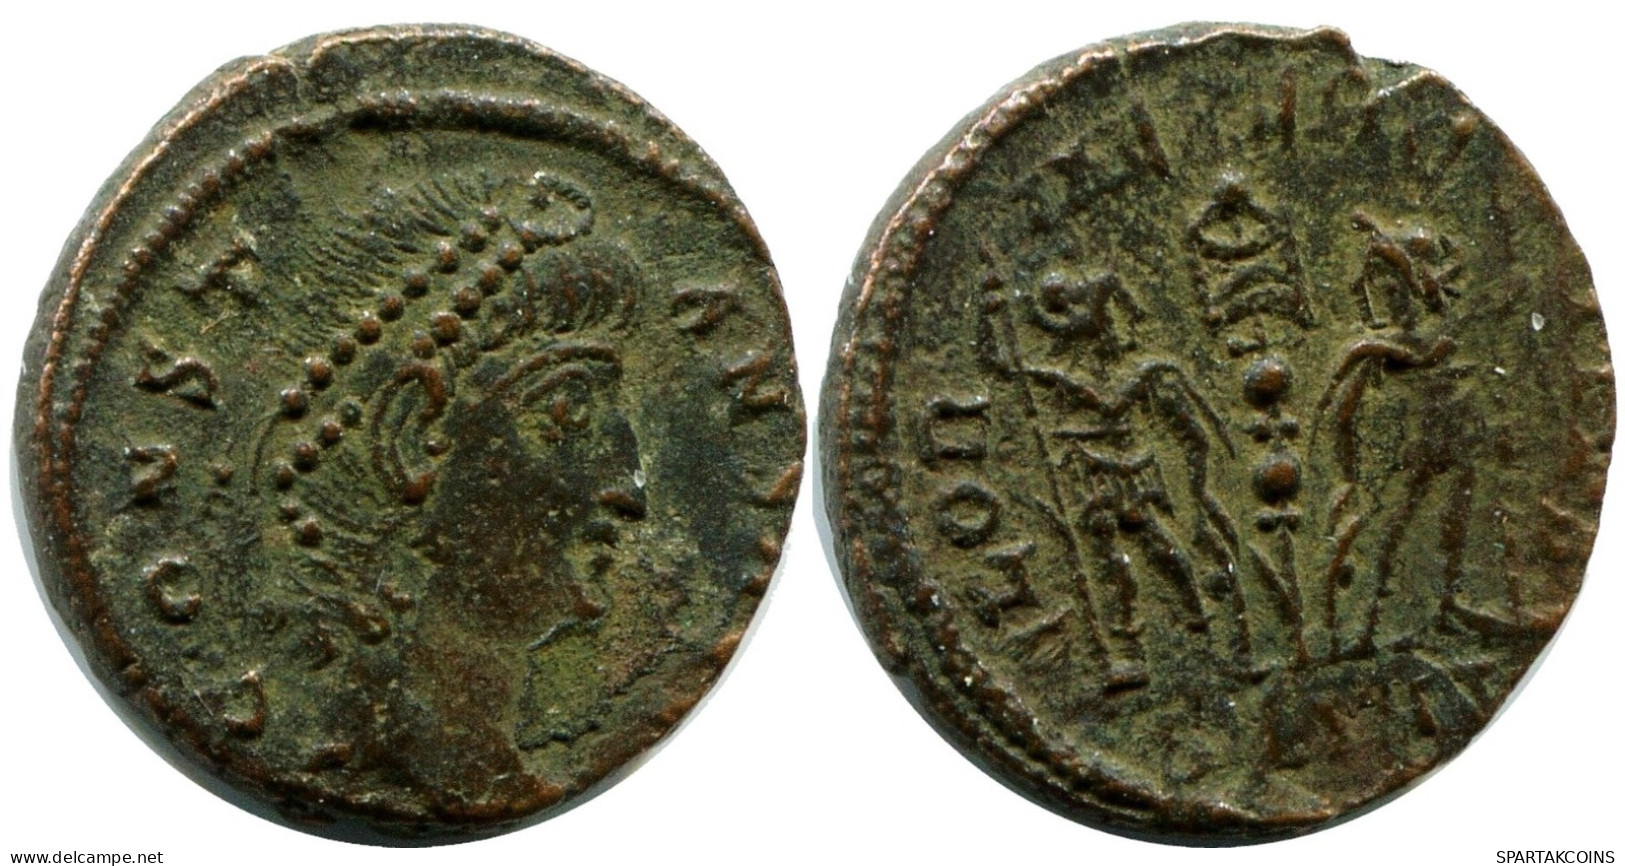 CONSTANS MINTED IN ANTIOCH FOUND IN IHNASYAH HOARD EGYPT #ANC11839.14.U.A - El Imperio Christiano (307 / 363)